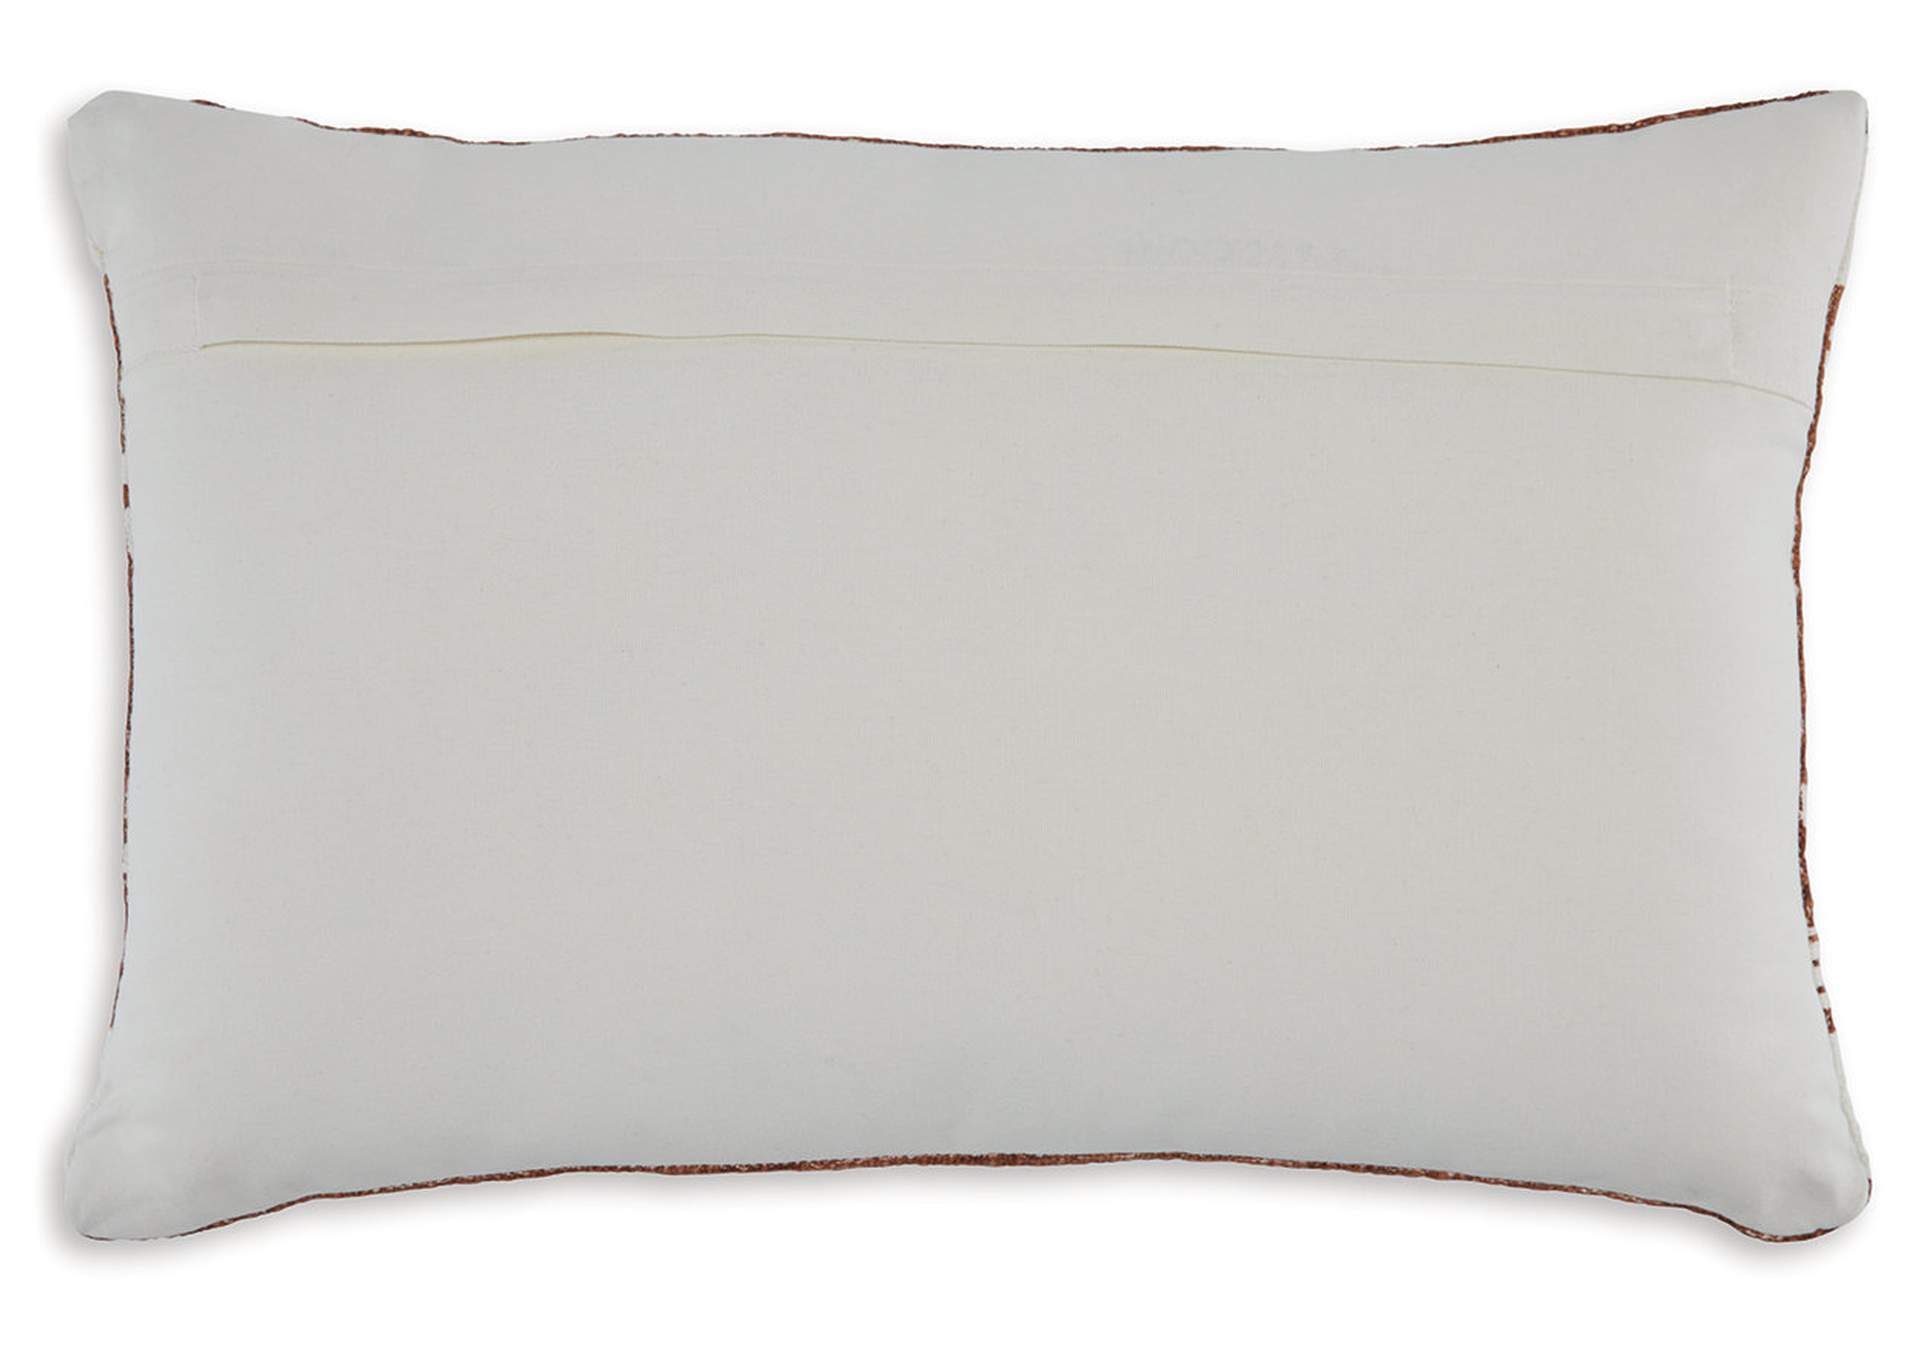 Ackford Pillow,Signature Design By Ashley